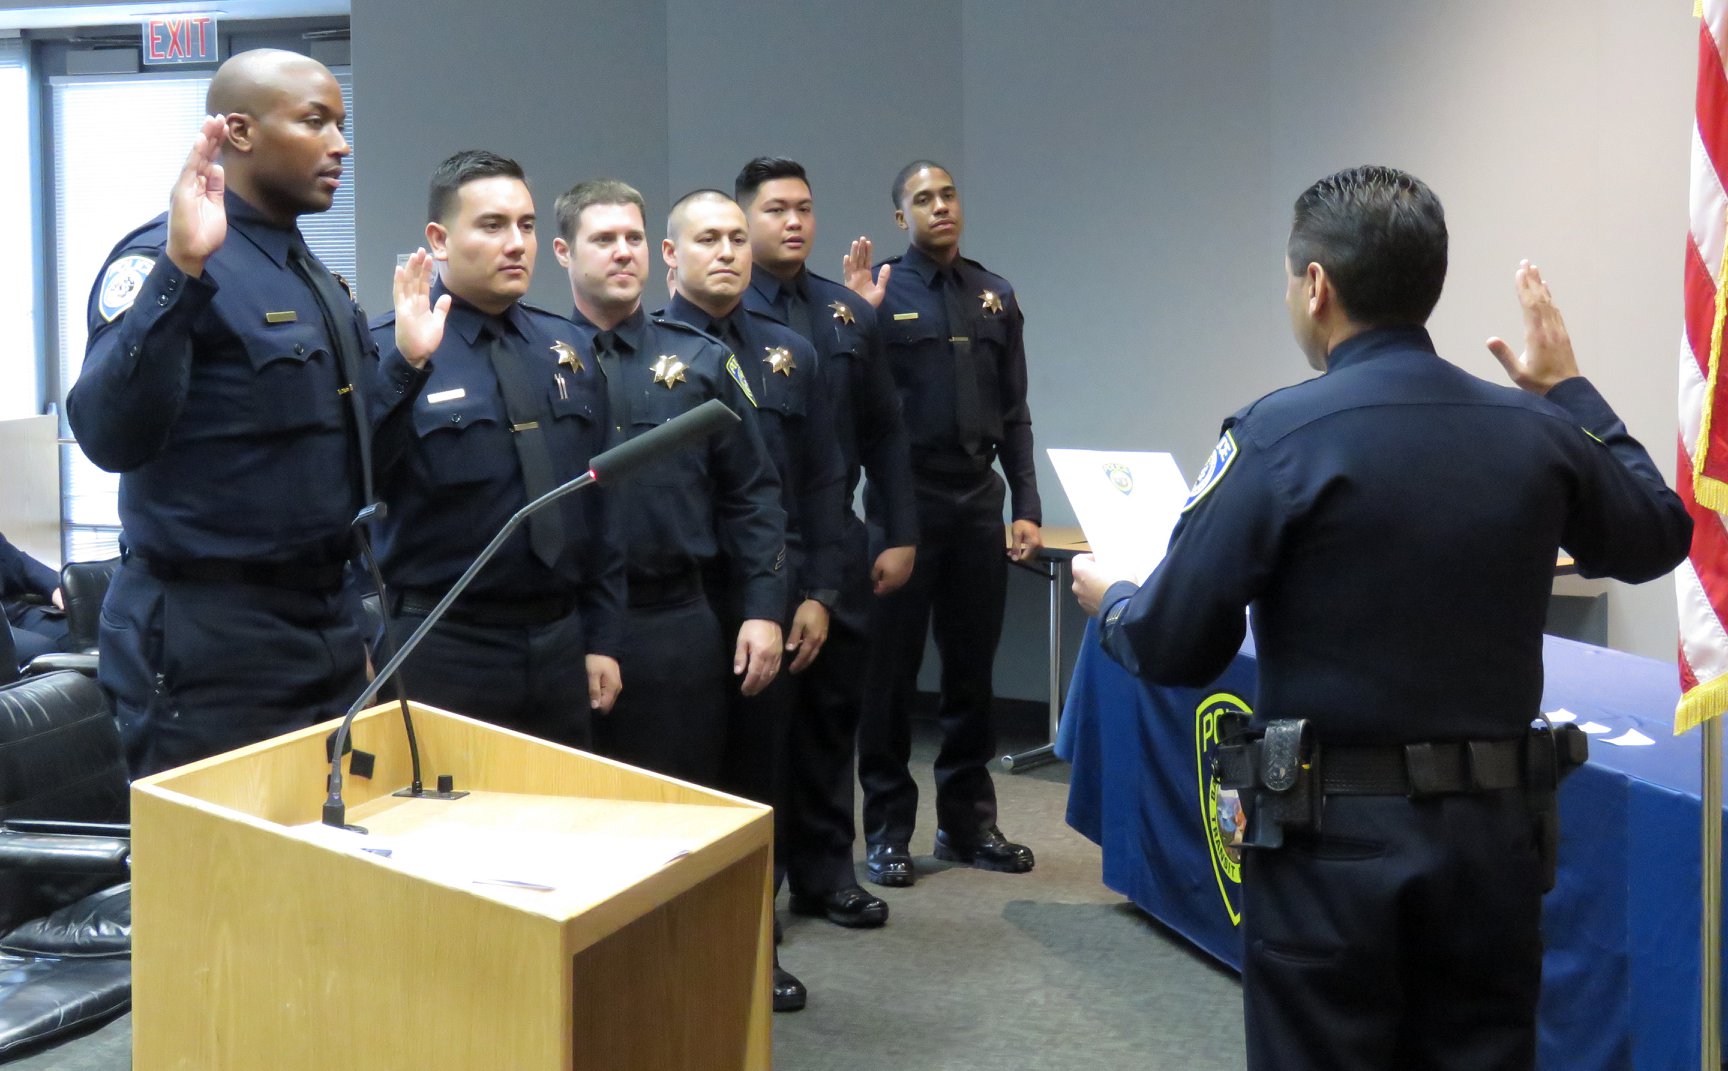 BPD laterals swearing in